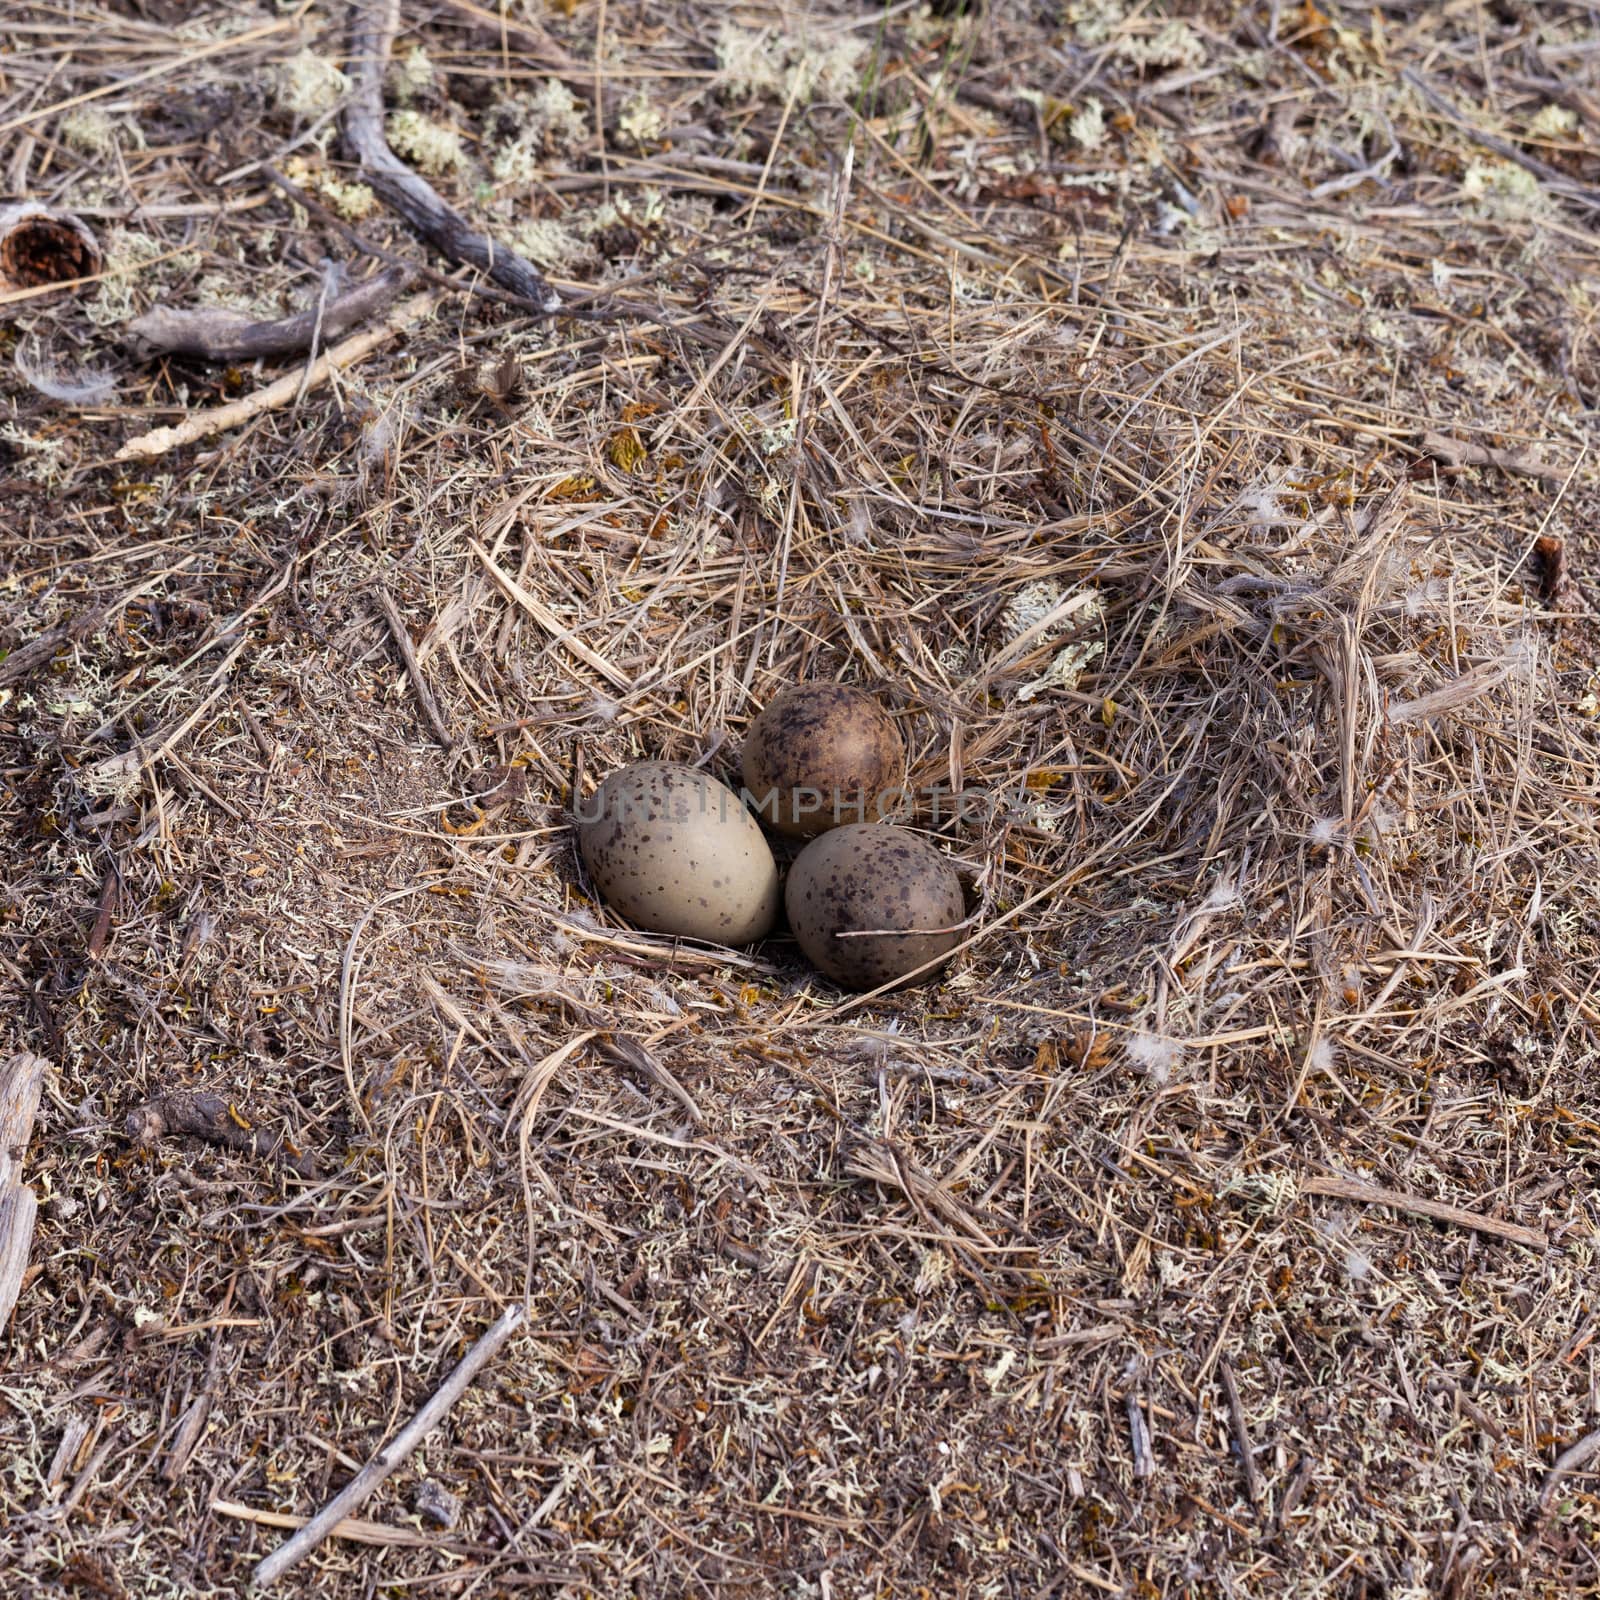 American Herring Gull Larus argentatus smithsonianus seagull nest on ground with three mottled eggs to be incubated